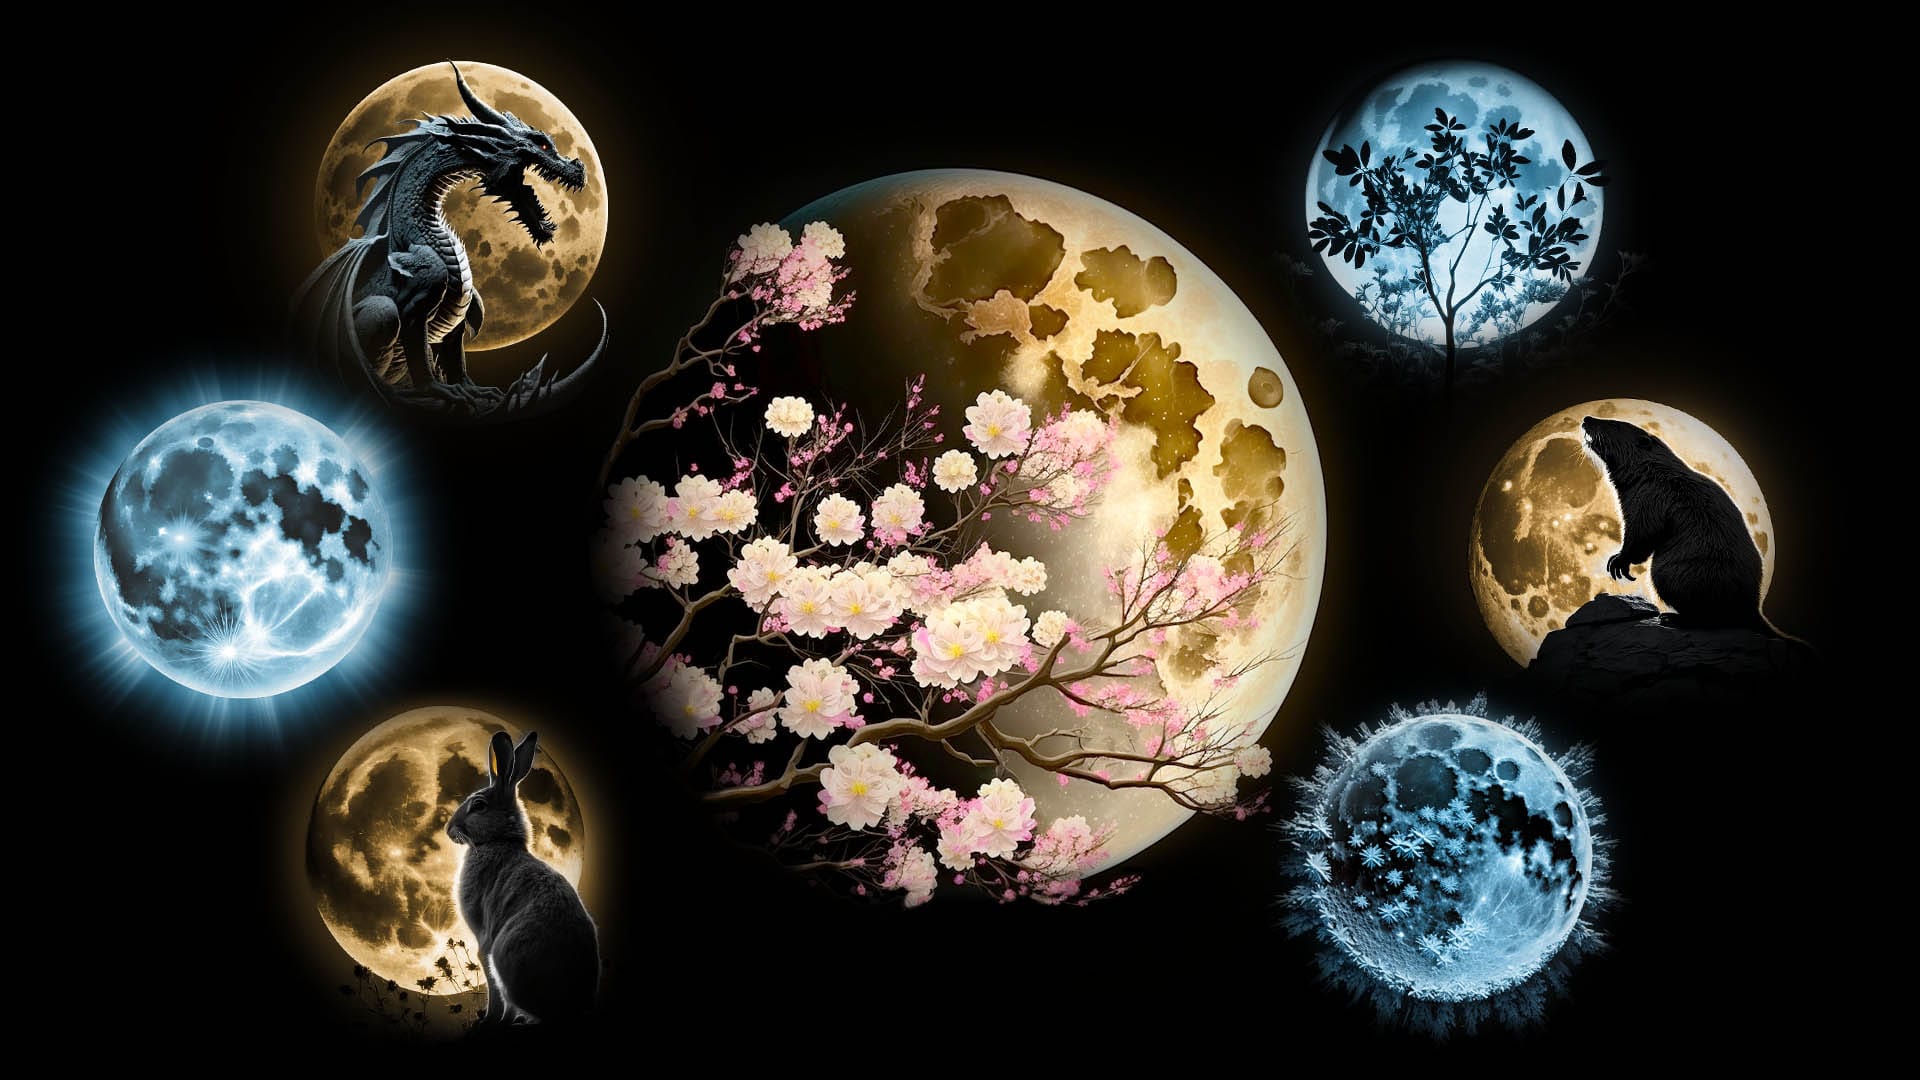 May’s Full Moon in different cultures